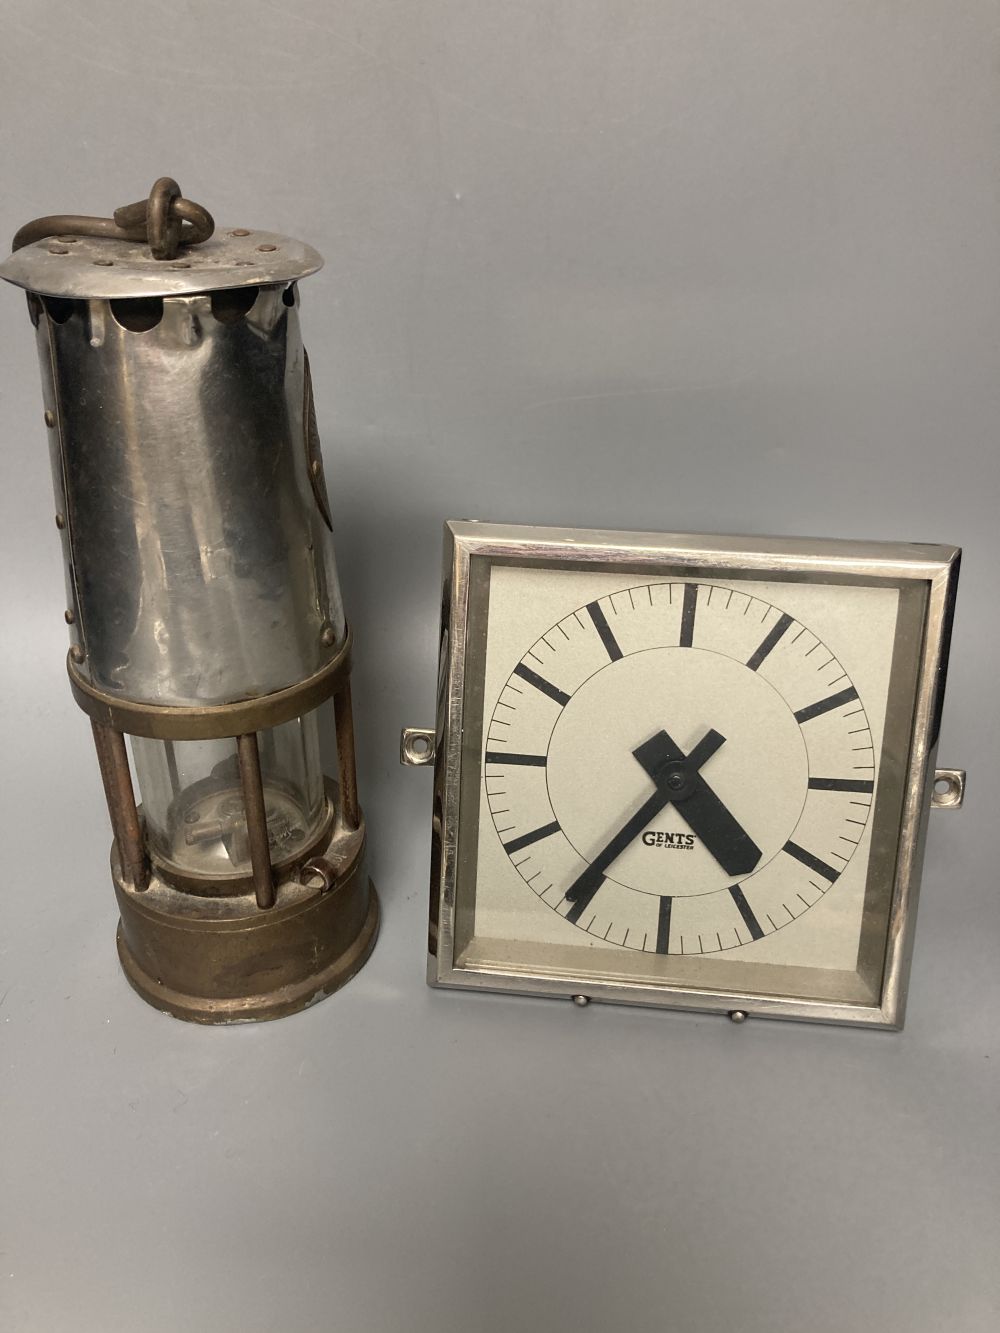 A 1930s Gents of Leicester mantel clock and a Miners lamp by Eccles, 24cm